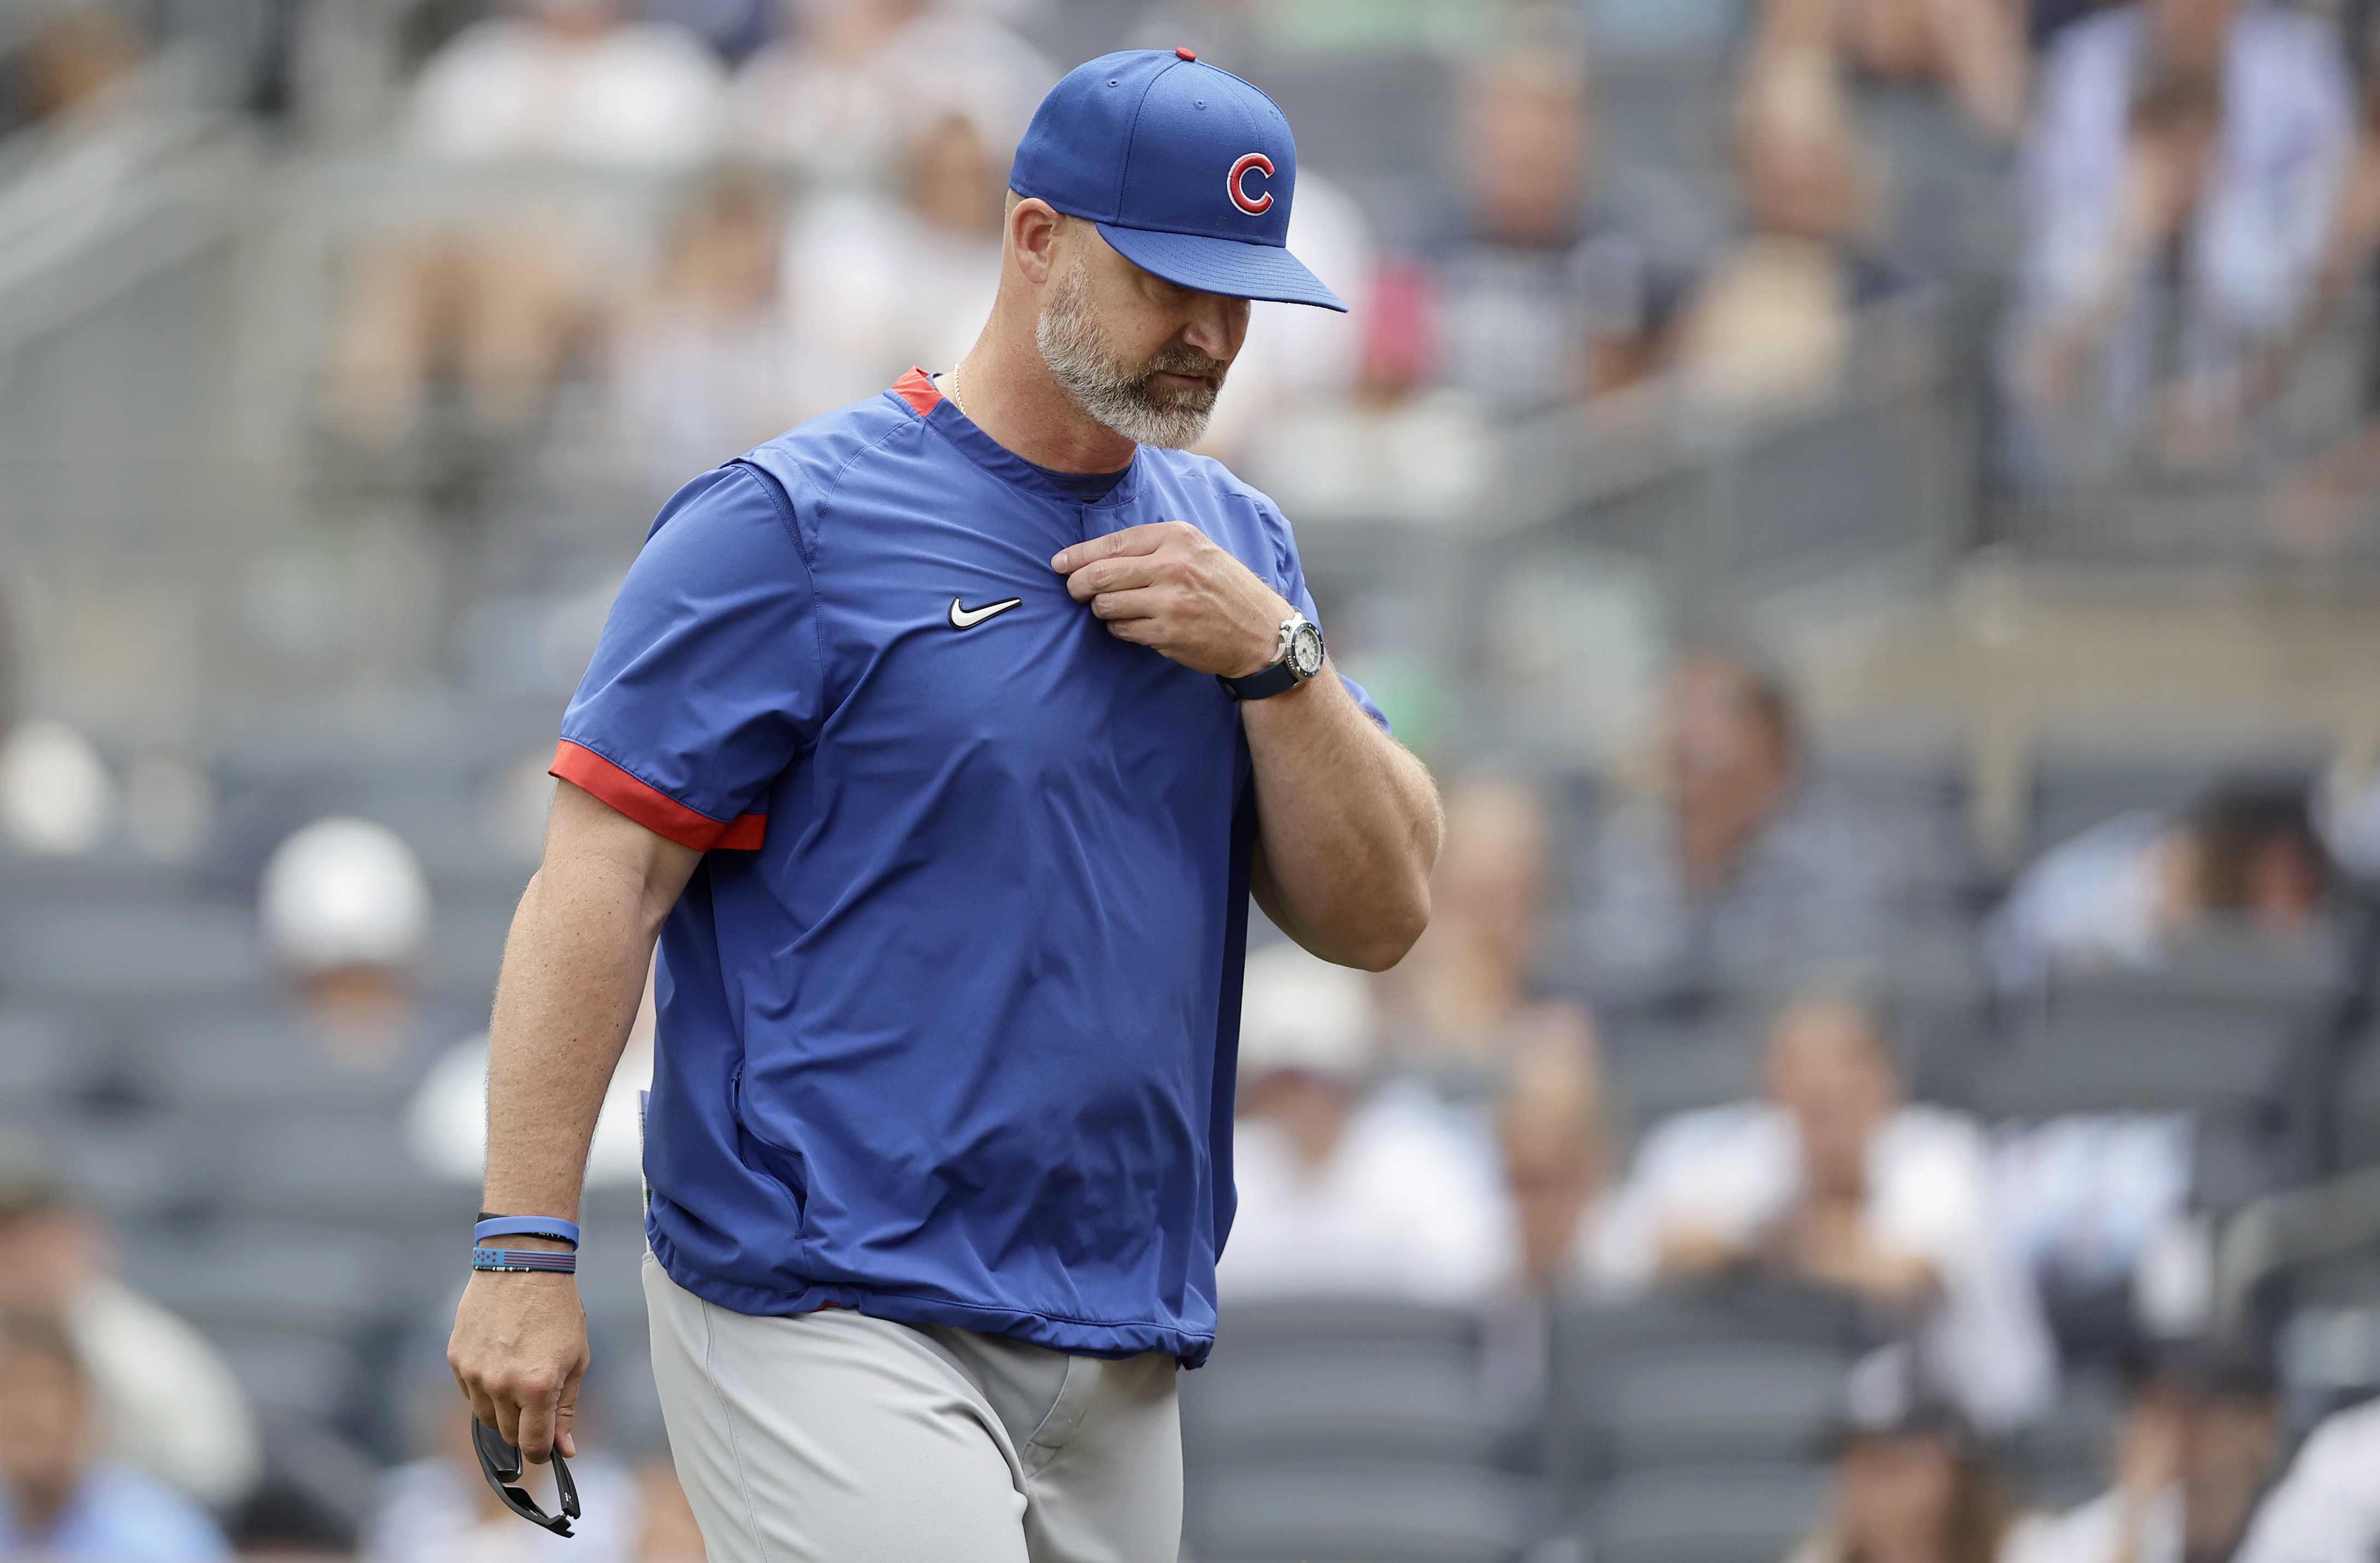 Should the Chicago Cubs move on from David Ross if they miss the playoffs?